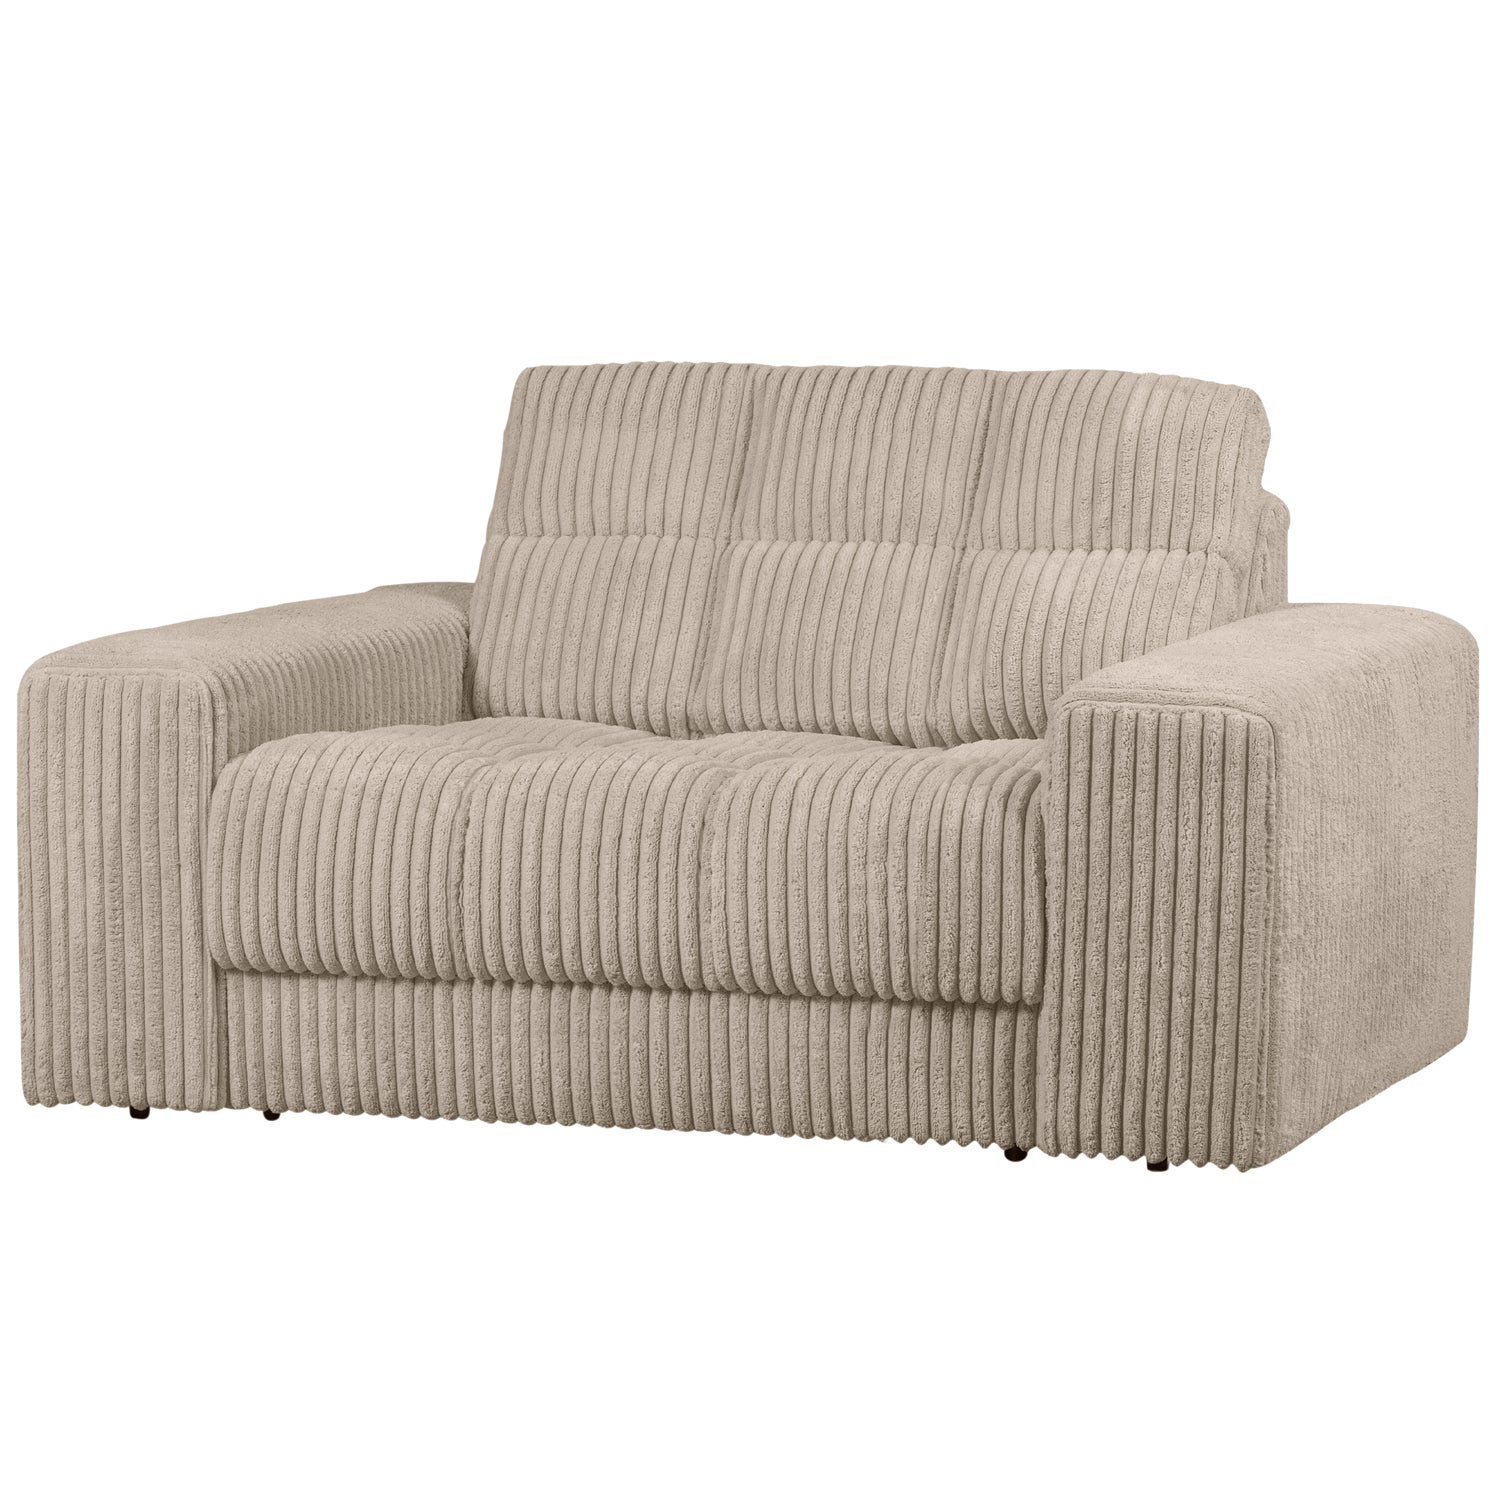 379006-RR-02_VS_WE_Second_date_loveseat_grove_ribstof_travertin_SA.png?auto=webp&format=png&width=1500&height=1500